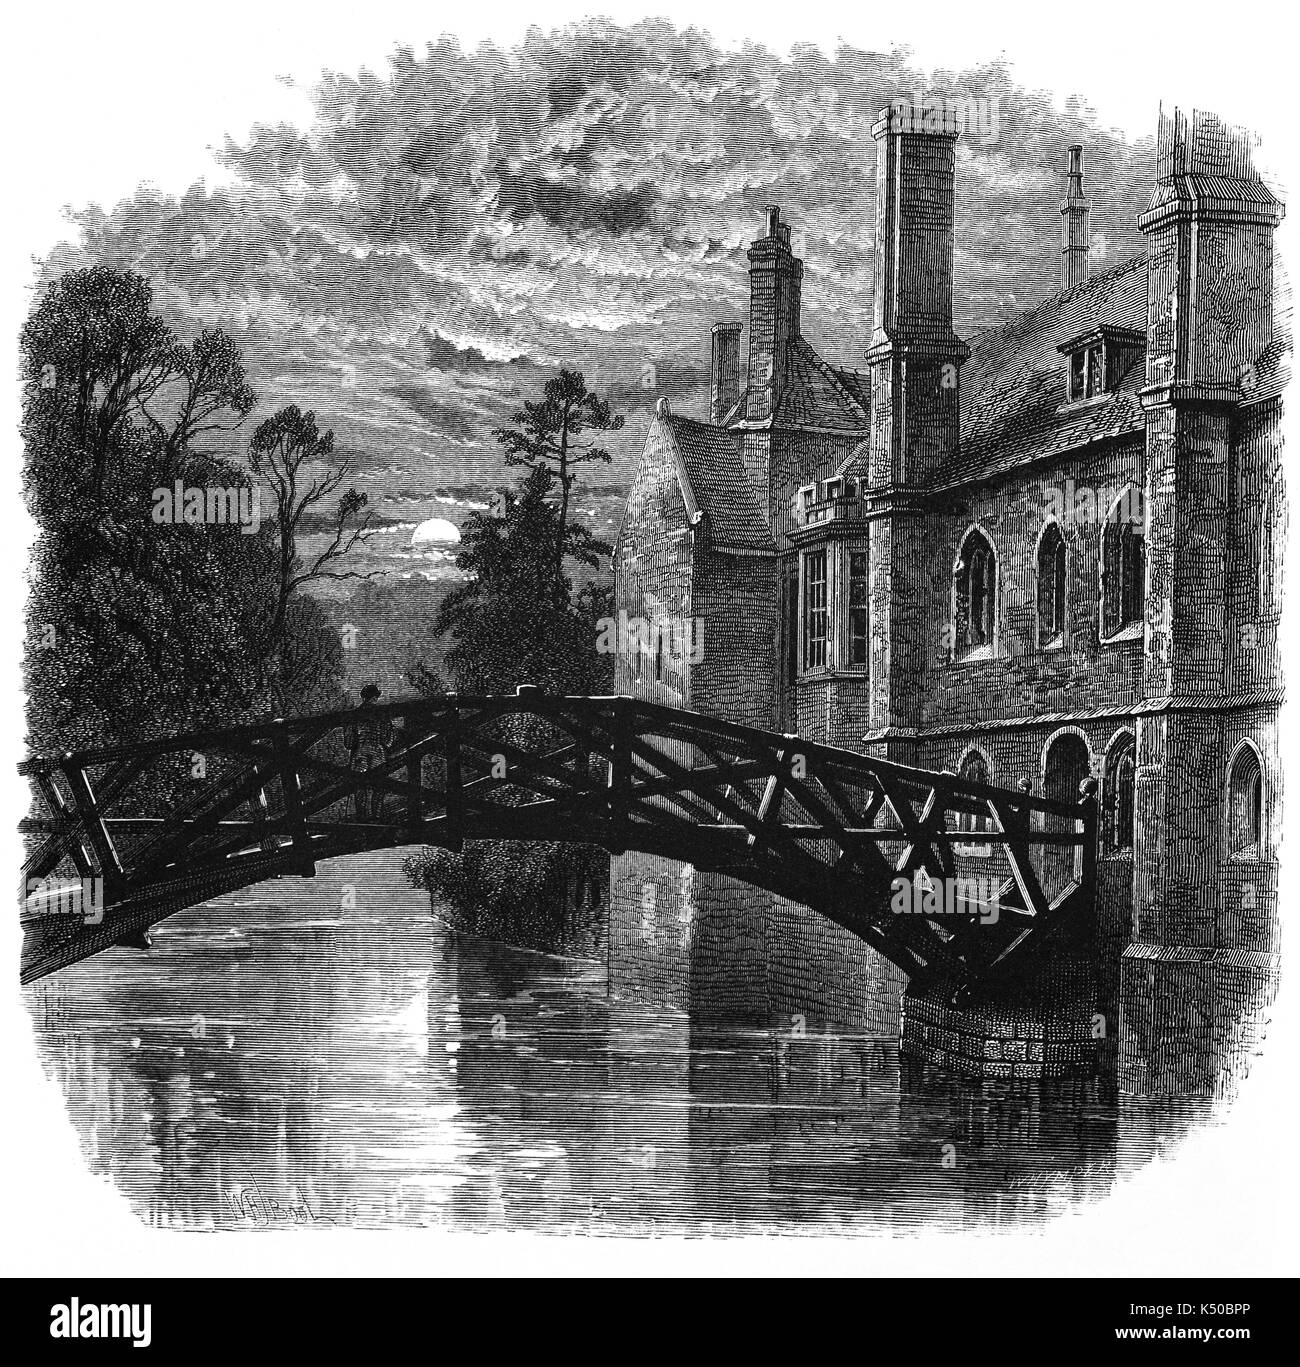 1870: A moonlit view of the Mathematical Bridge over the River Cam built in 1749 and connecting the two sides Queens' College, a constituent college of the University of Cambridge, England.  Queens' is one of the oldest and largest colleges of the university, founded in 1448 by Margaret of Anjou (the queen of Henry VI, who founded King's College), and has some of the most recognisable buildings in Cambridge. Stock Photo